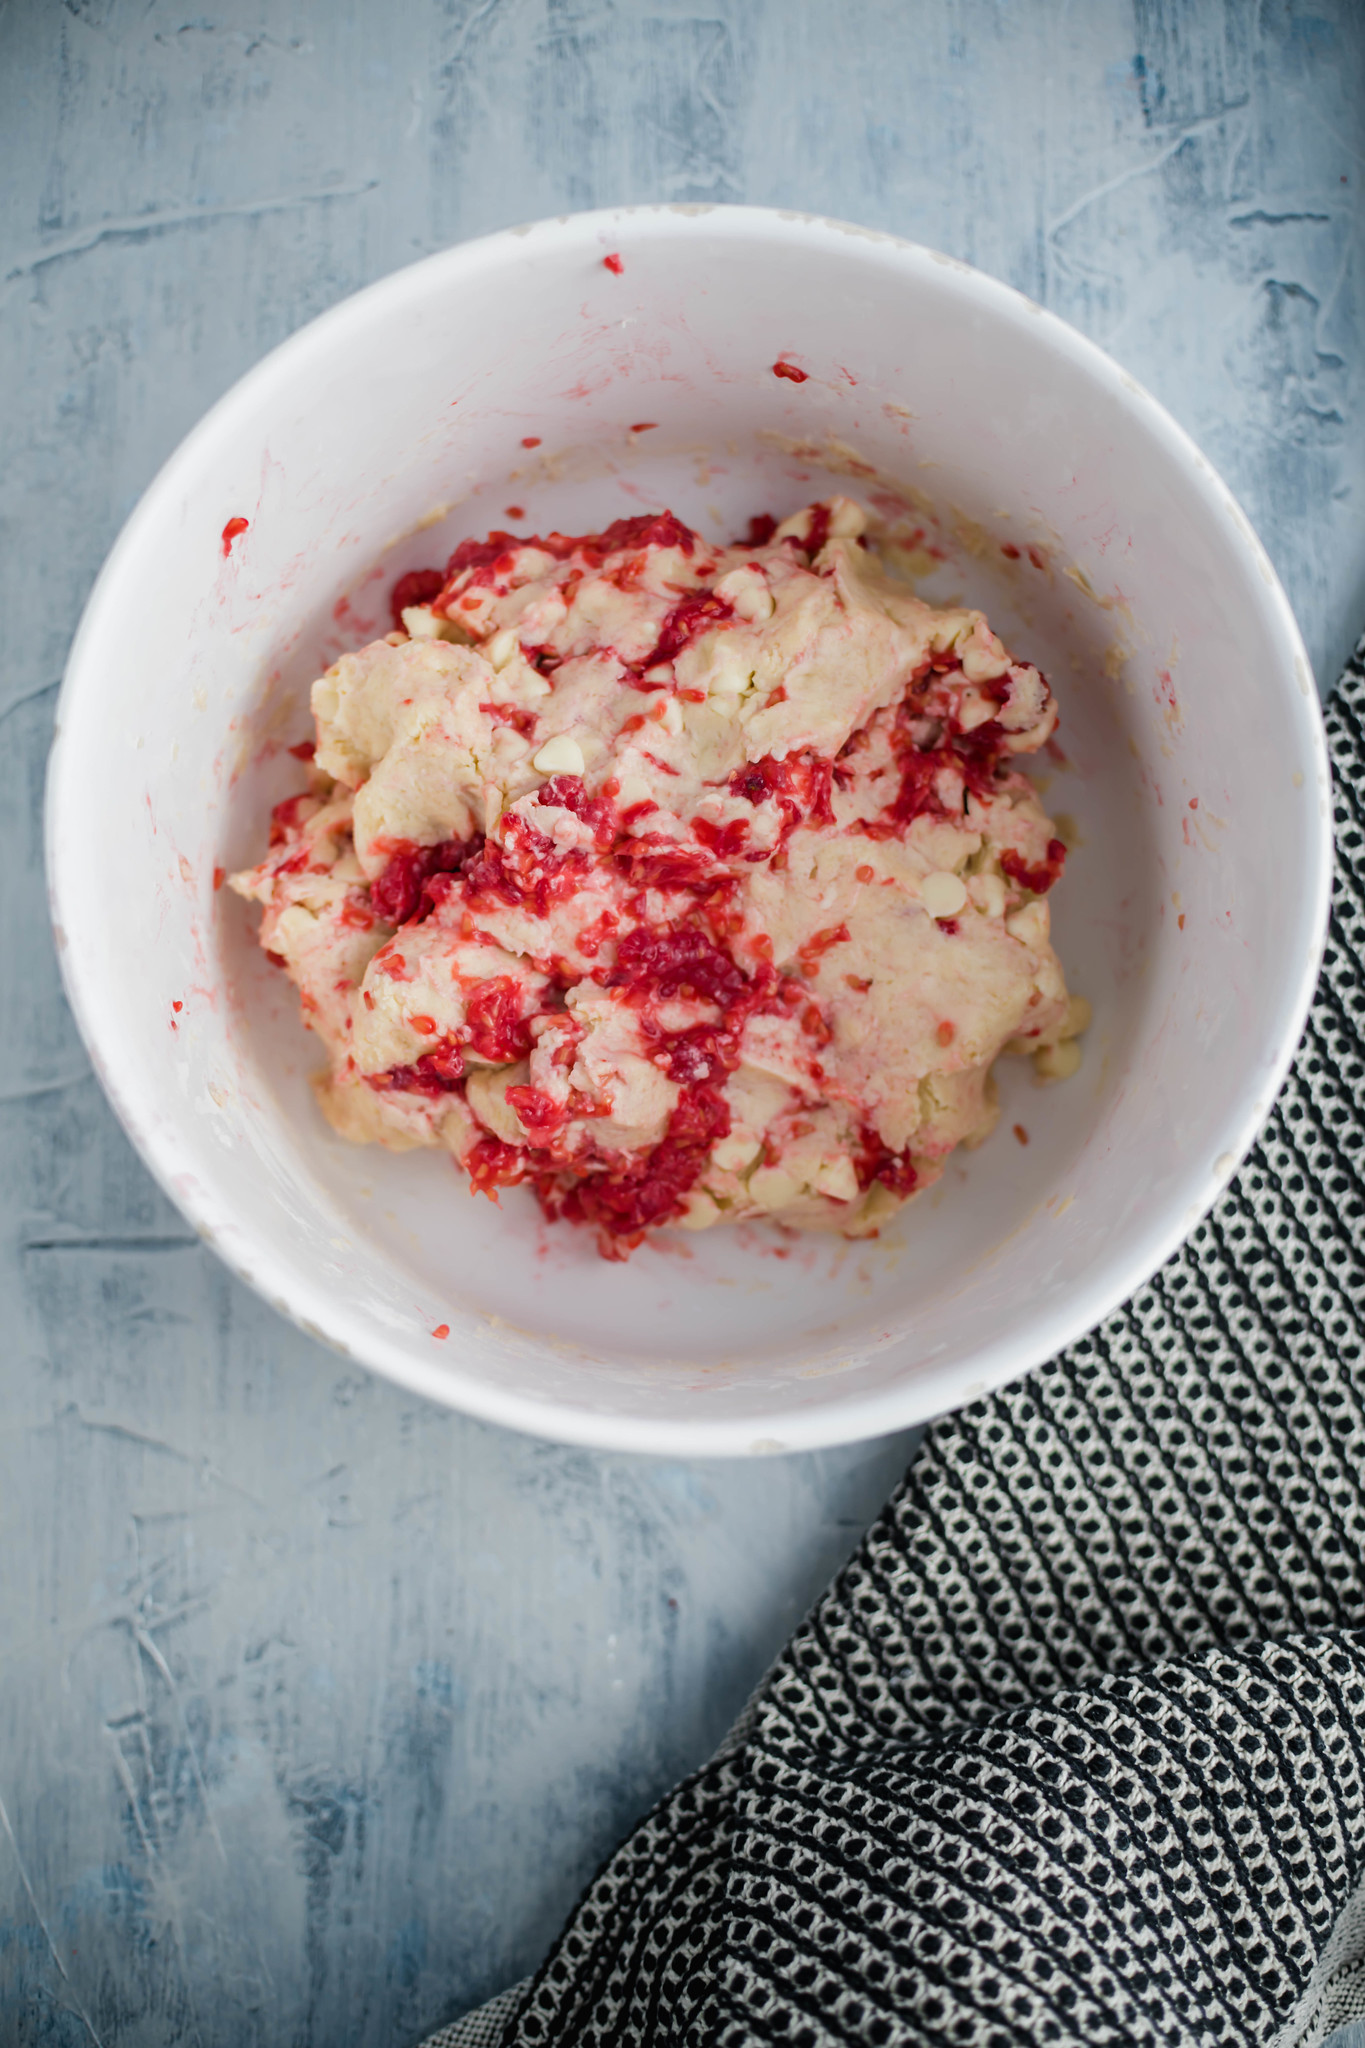 Raspberry scone dough mixed together in a large white bowl.